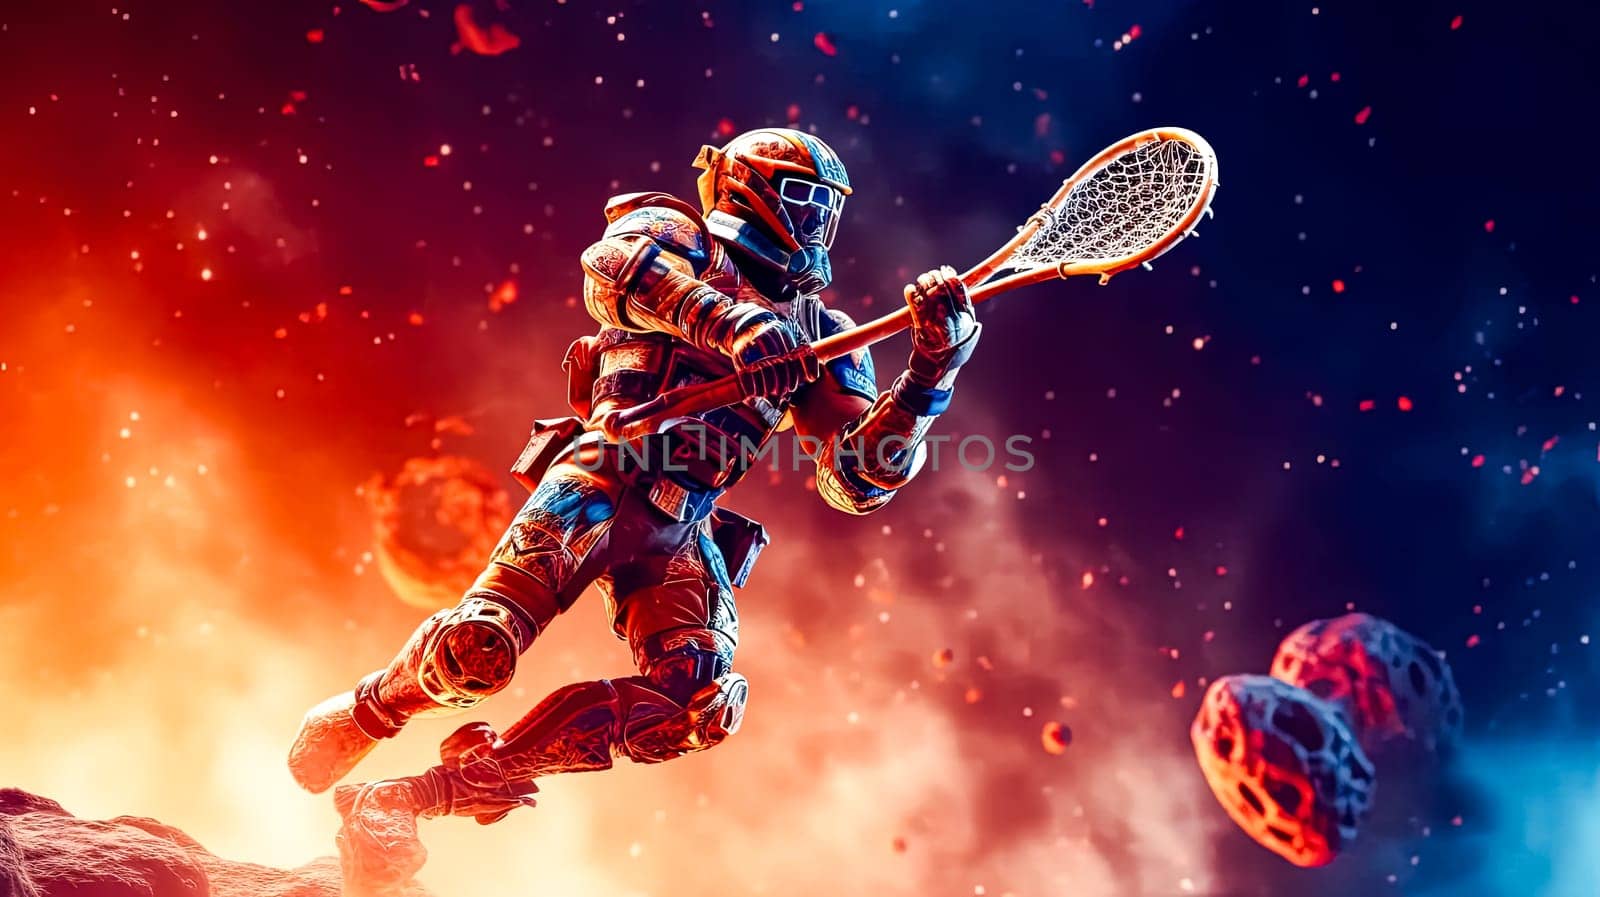 Dynamic lacrosse player in action, perfect for sports betting advertisement. by Alla_Morozova93